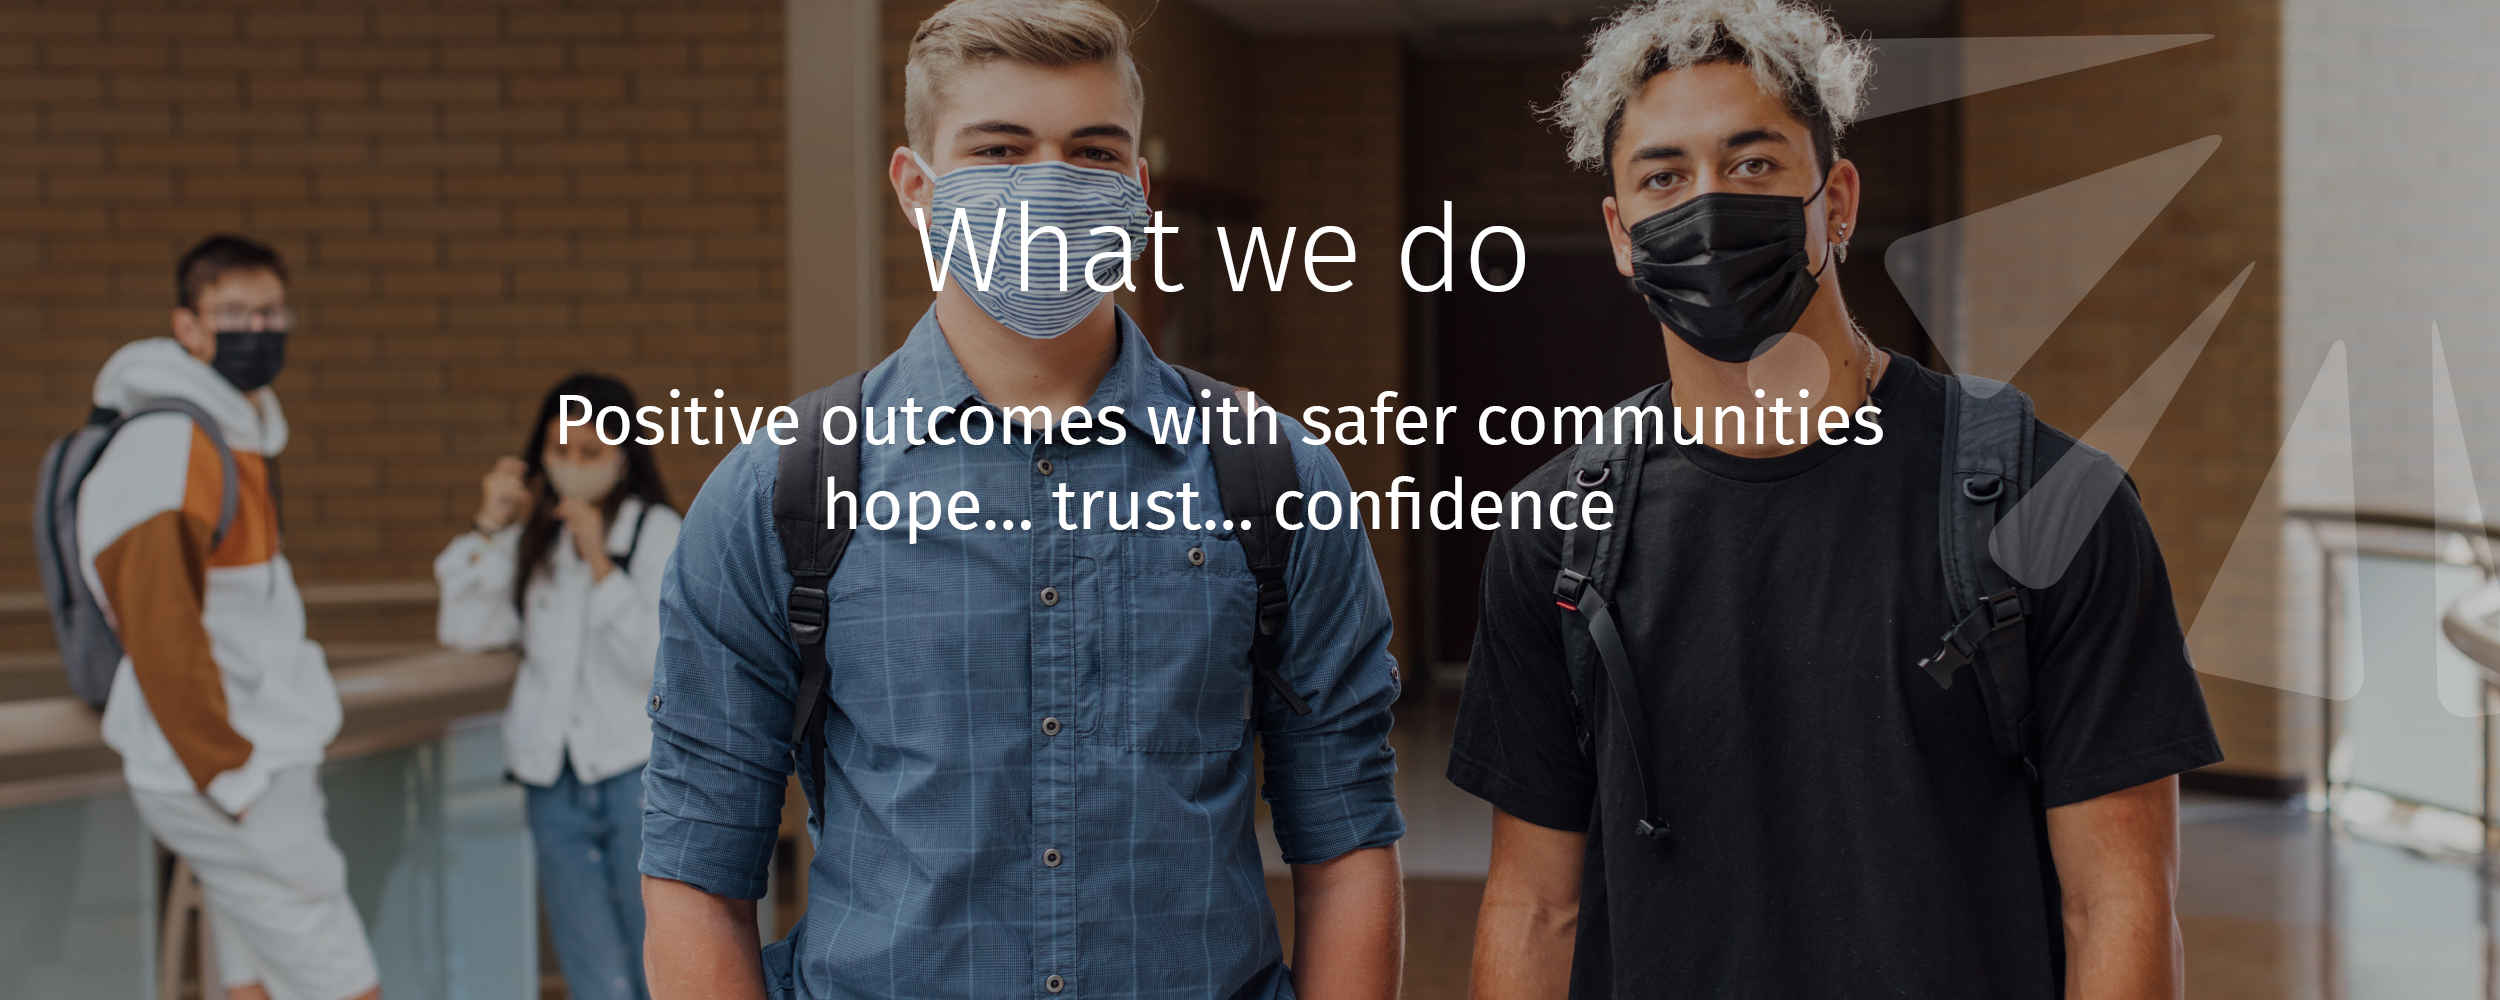 Positive outcomes with safe communities: hope... trust... confidence